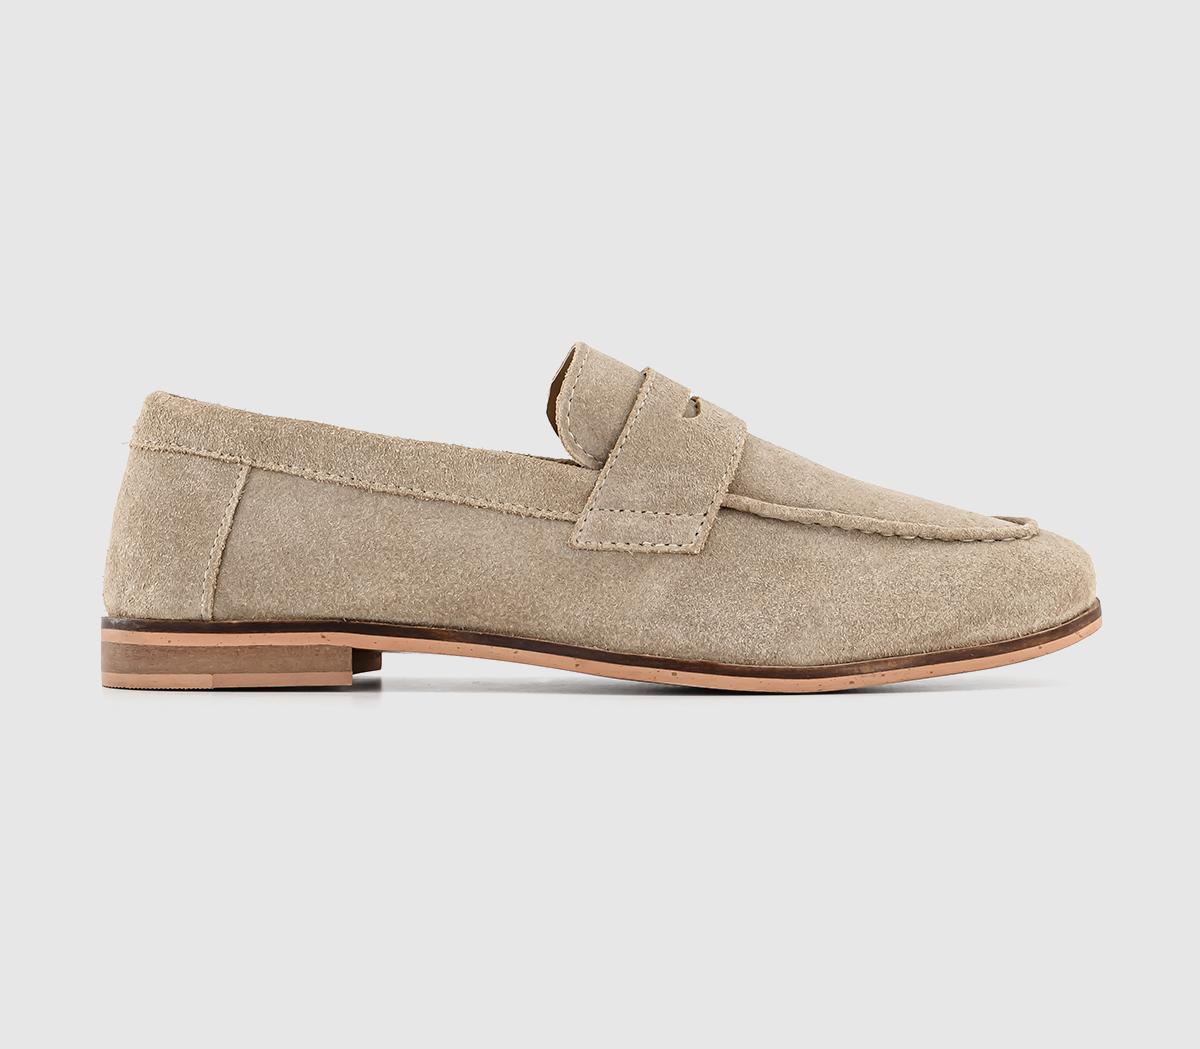 OFFICEColbert Saddle LoafersStone Suede